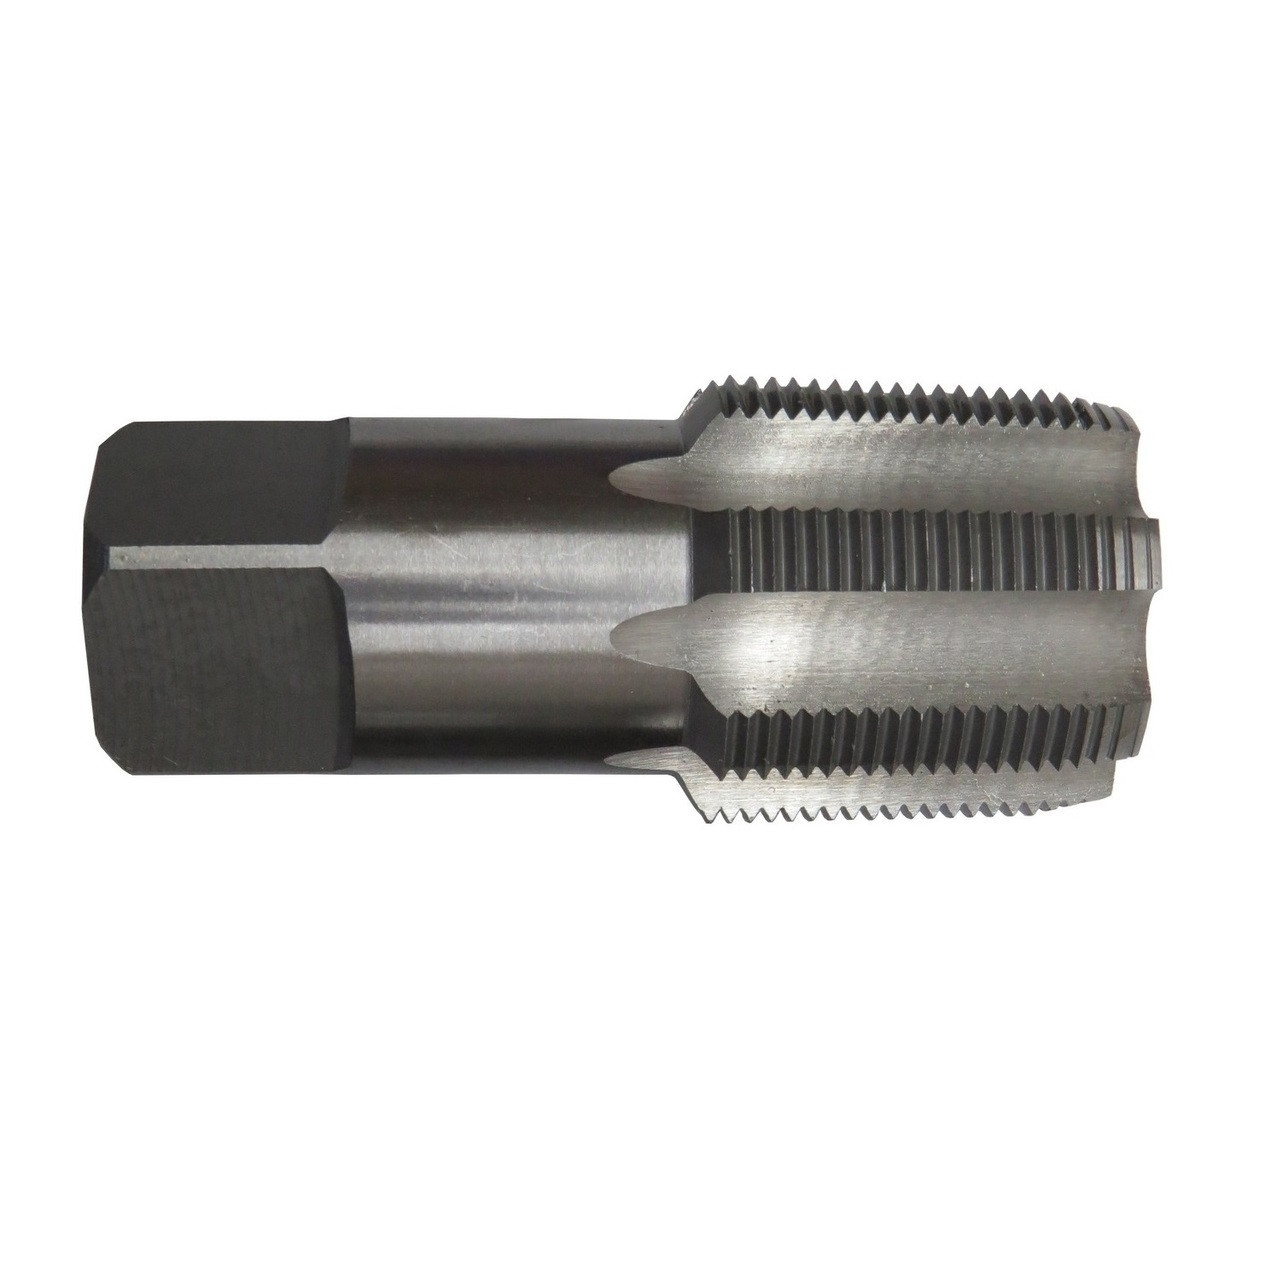 Details about   Pipe Thread Tap High-Speed Steel Water Pipe Repair Tap HSS Z 1/4‑18 